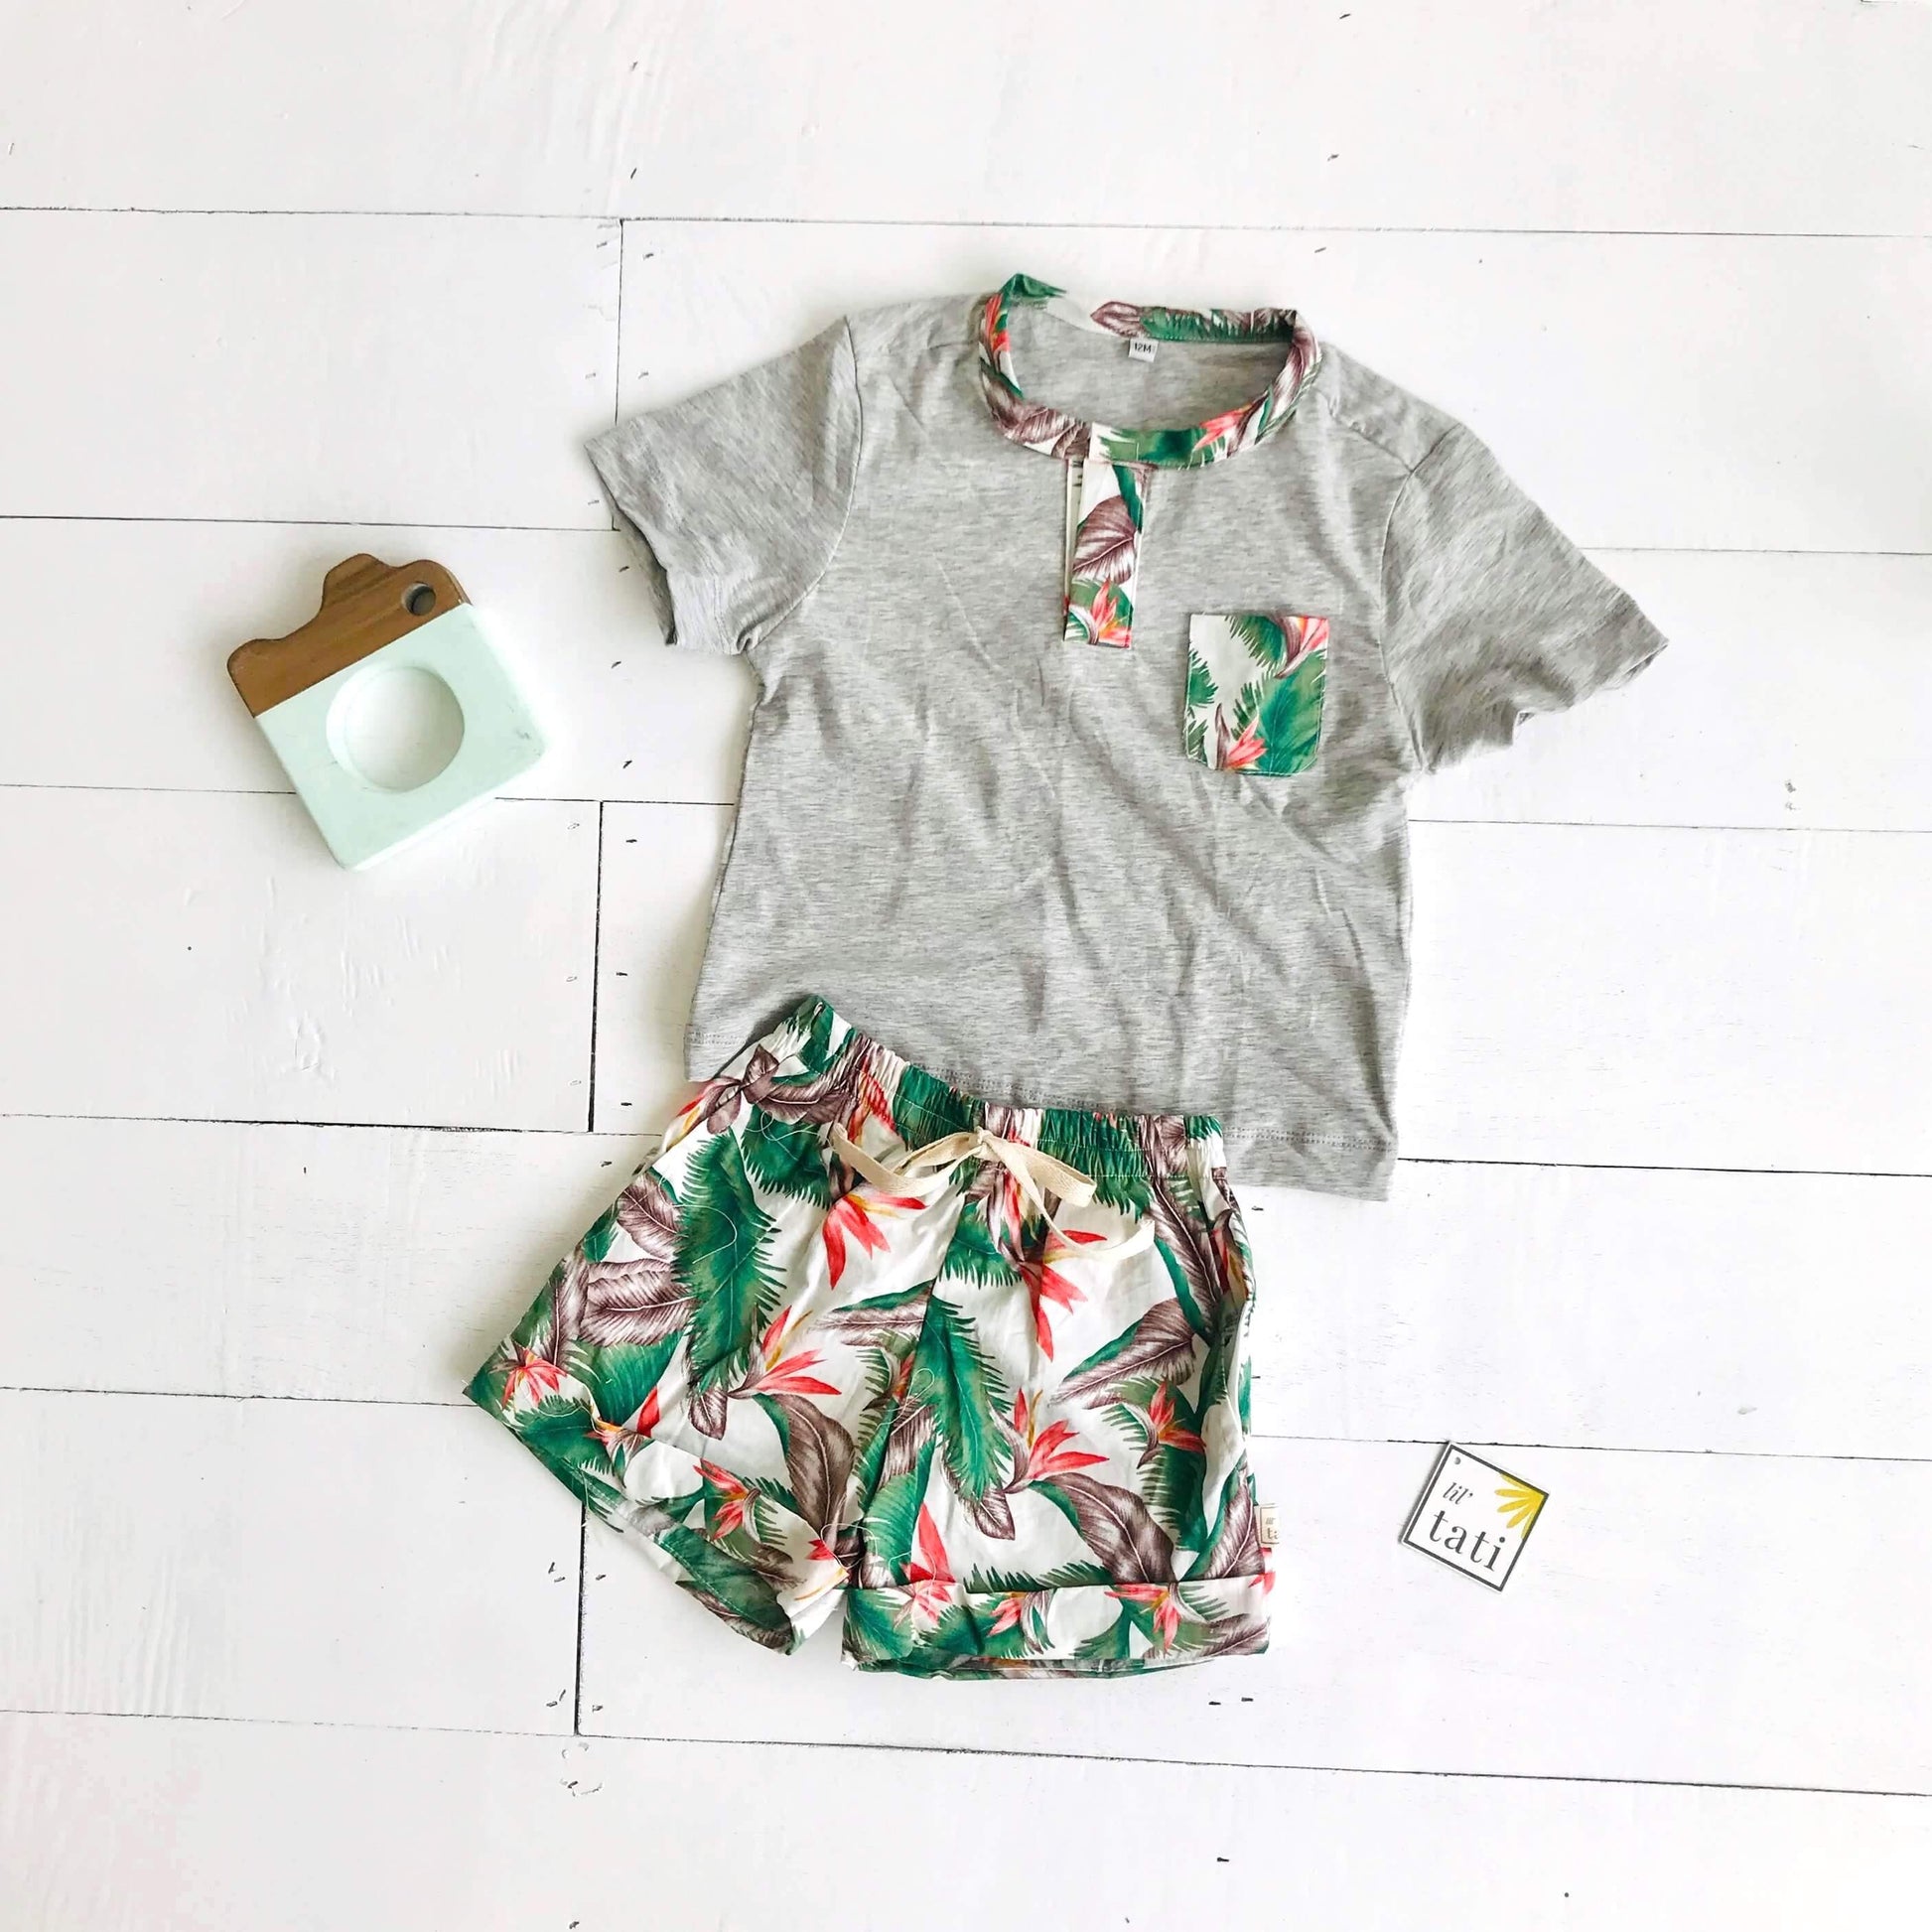 Caper Top & Shorts in Birds of Paradise and Gray Stretch - Lil' Tati